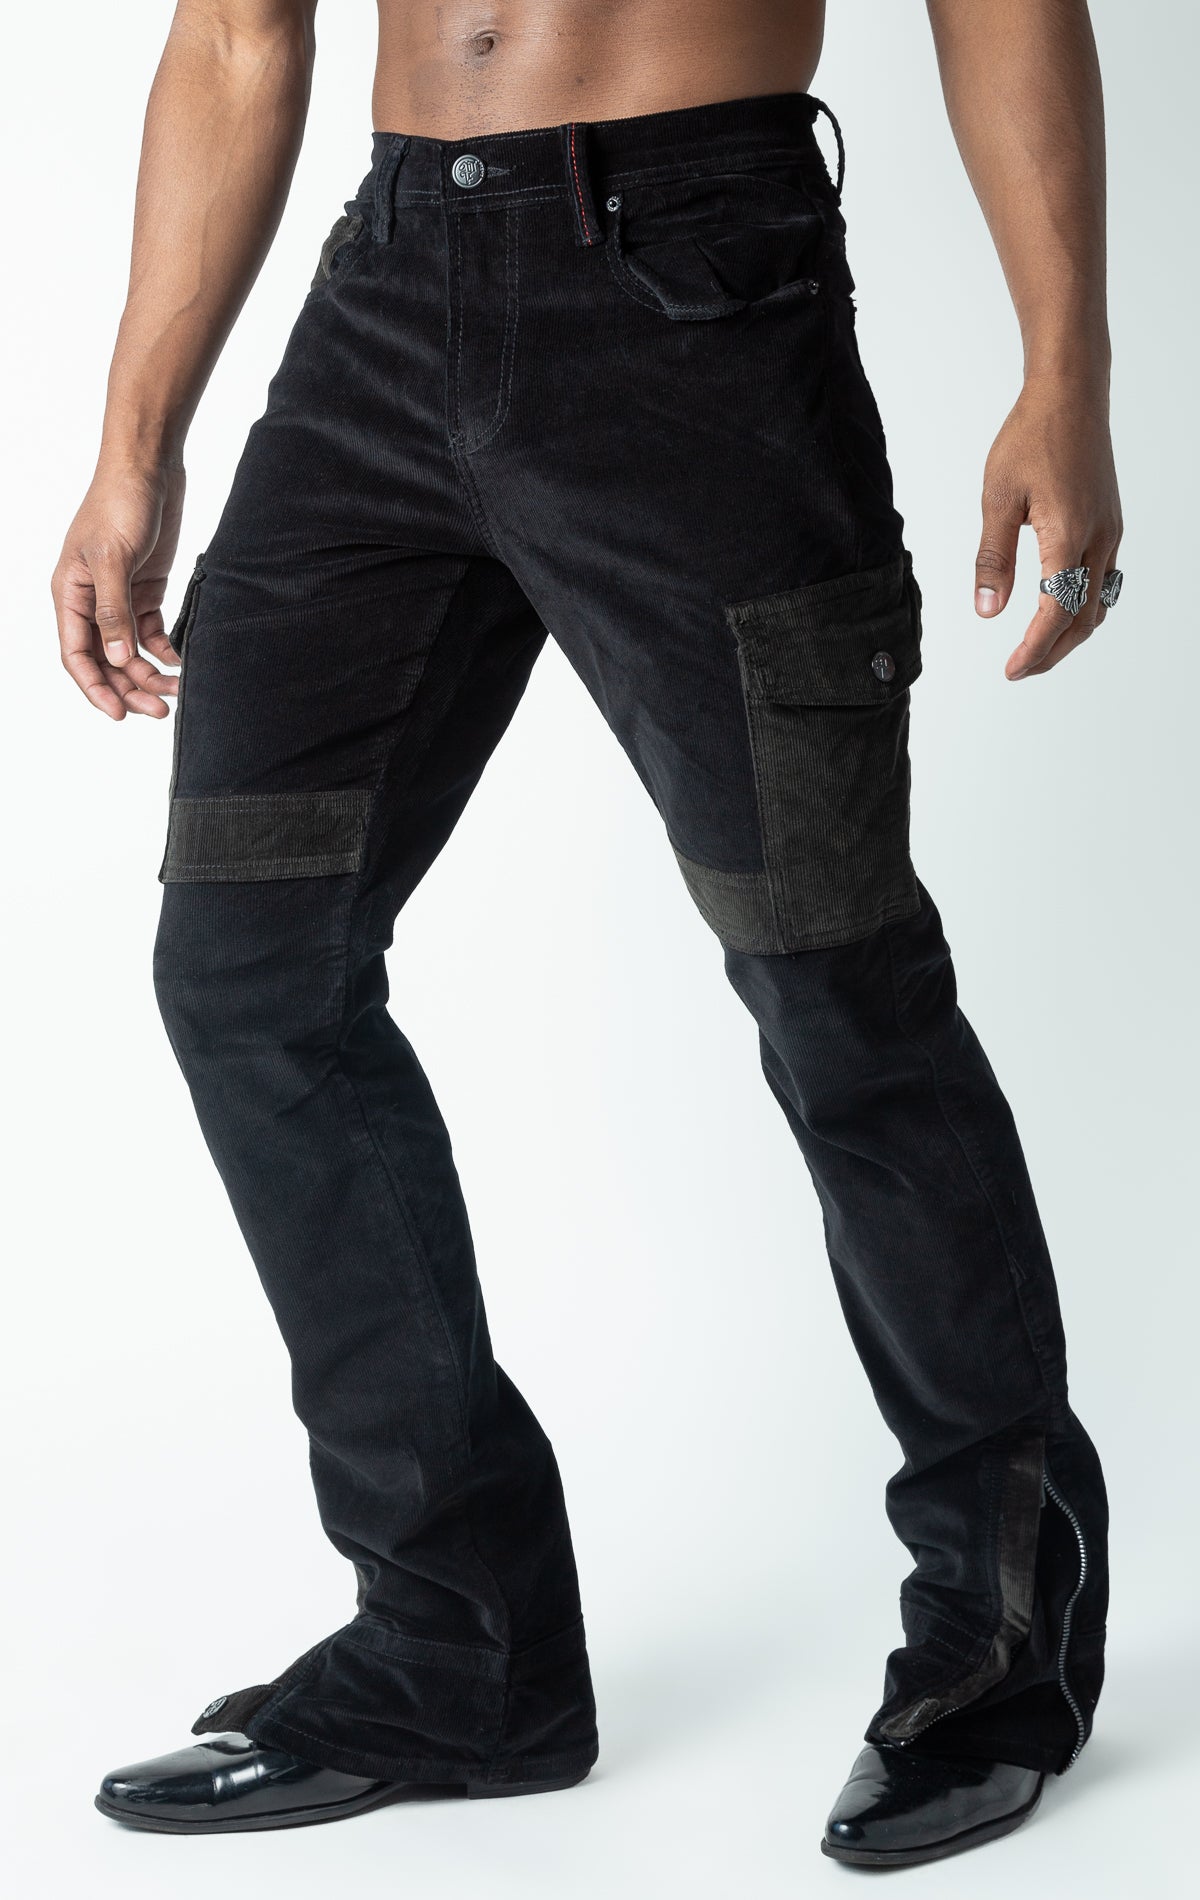 black corduroy semi-stacked flare jeans